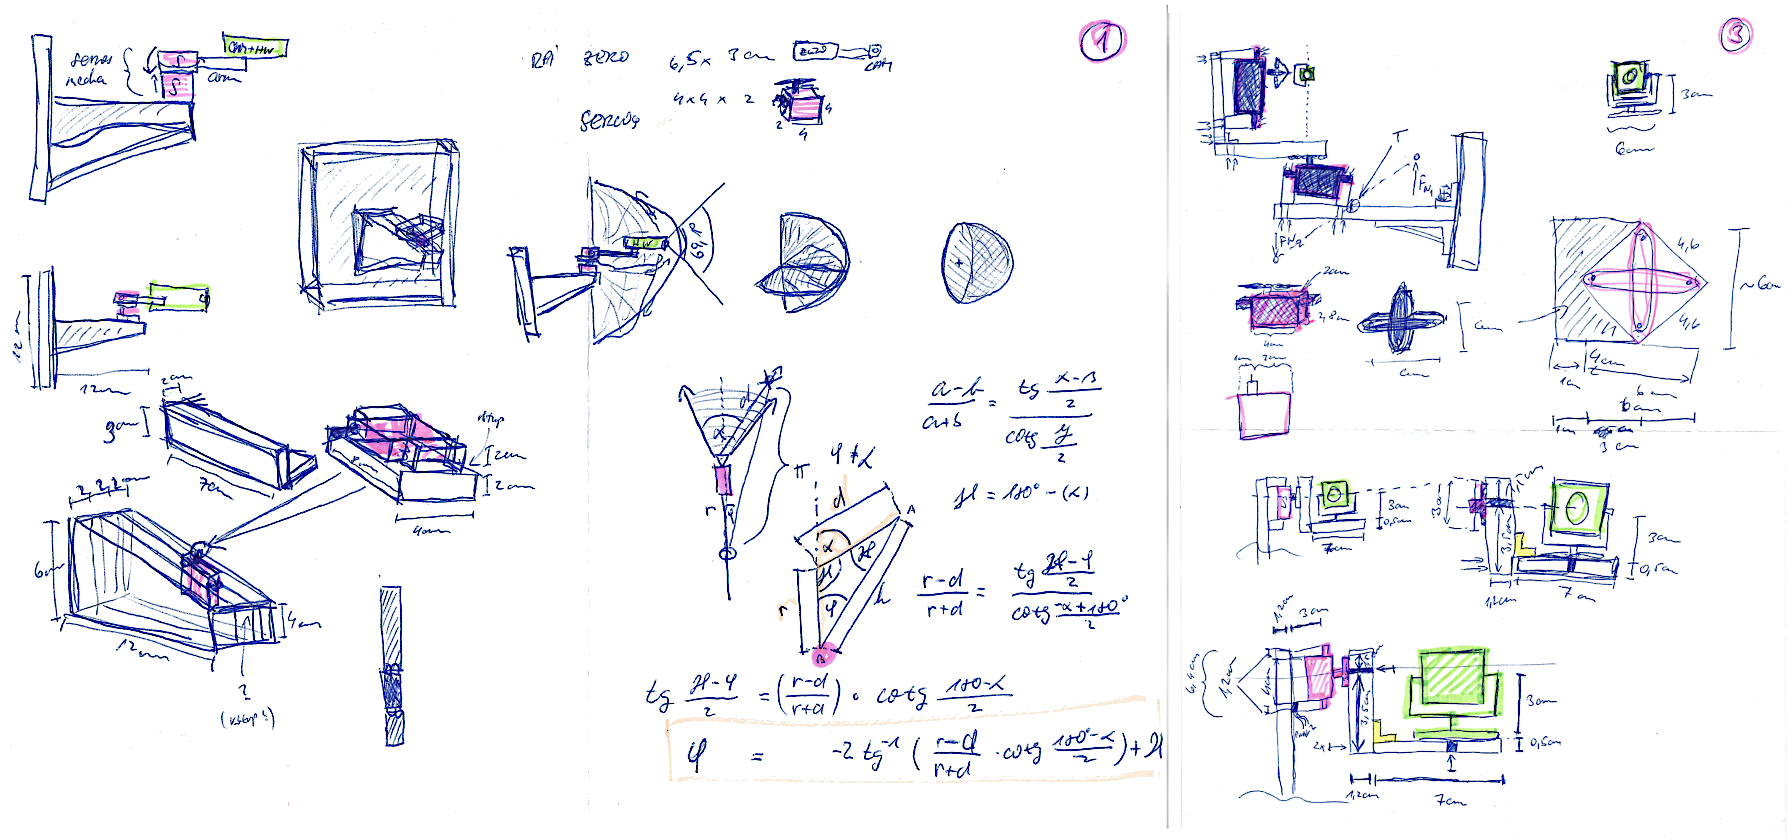 Initial sketches of servo-motor motions and arm movements, angle calculations